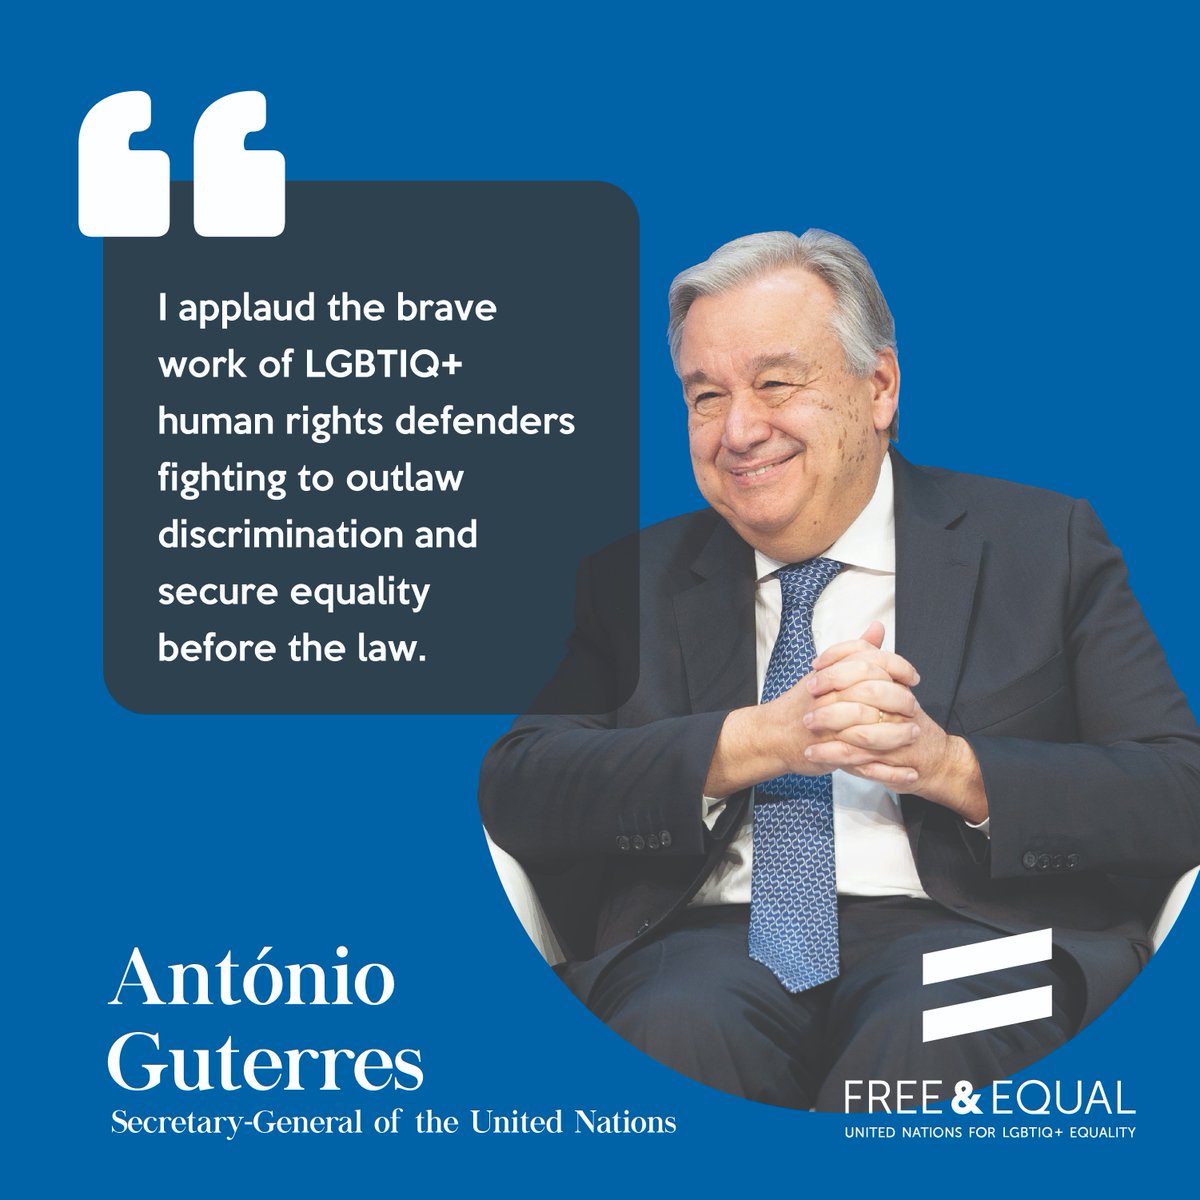 'I applaud the brave work of LGBTIQ+ human rights defenders fighting to outlaw discrimination and secure equality before the law.' @UN Secretary-General @AntonioGuterres for the International Day Against Homophobia, Biphobia and Transphobia (IDAHOBIT) #RightsEqualsHealth #EndAIDS